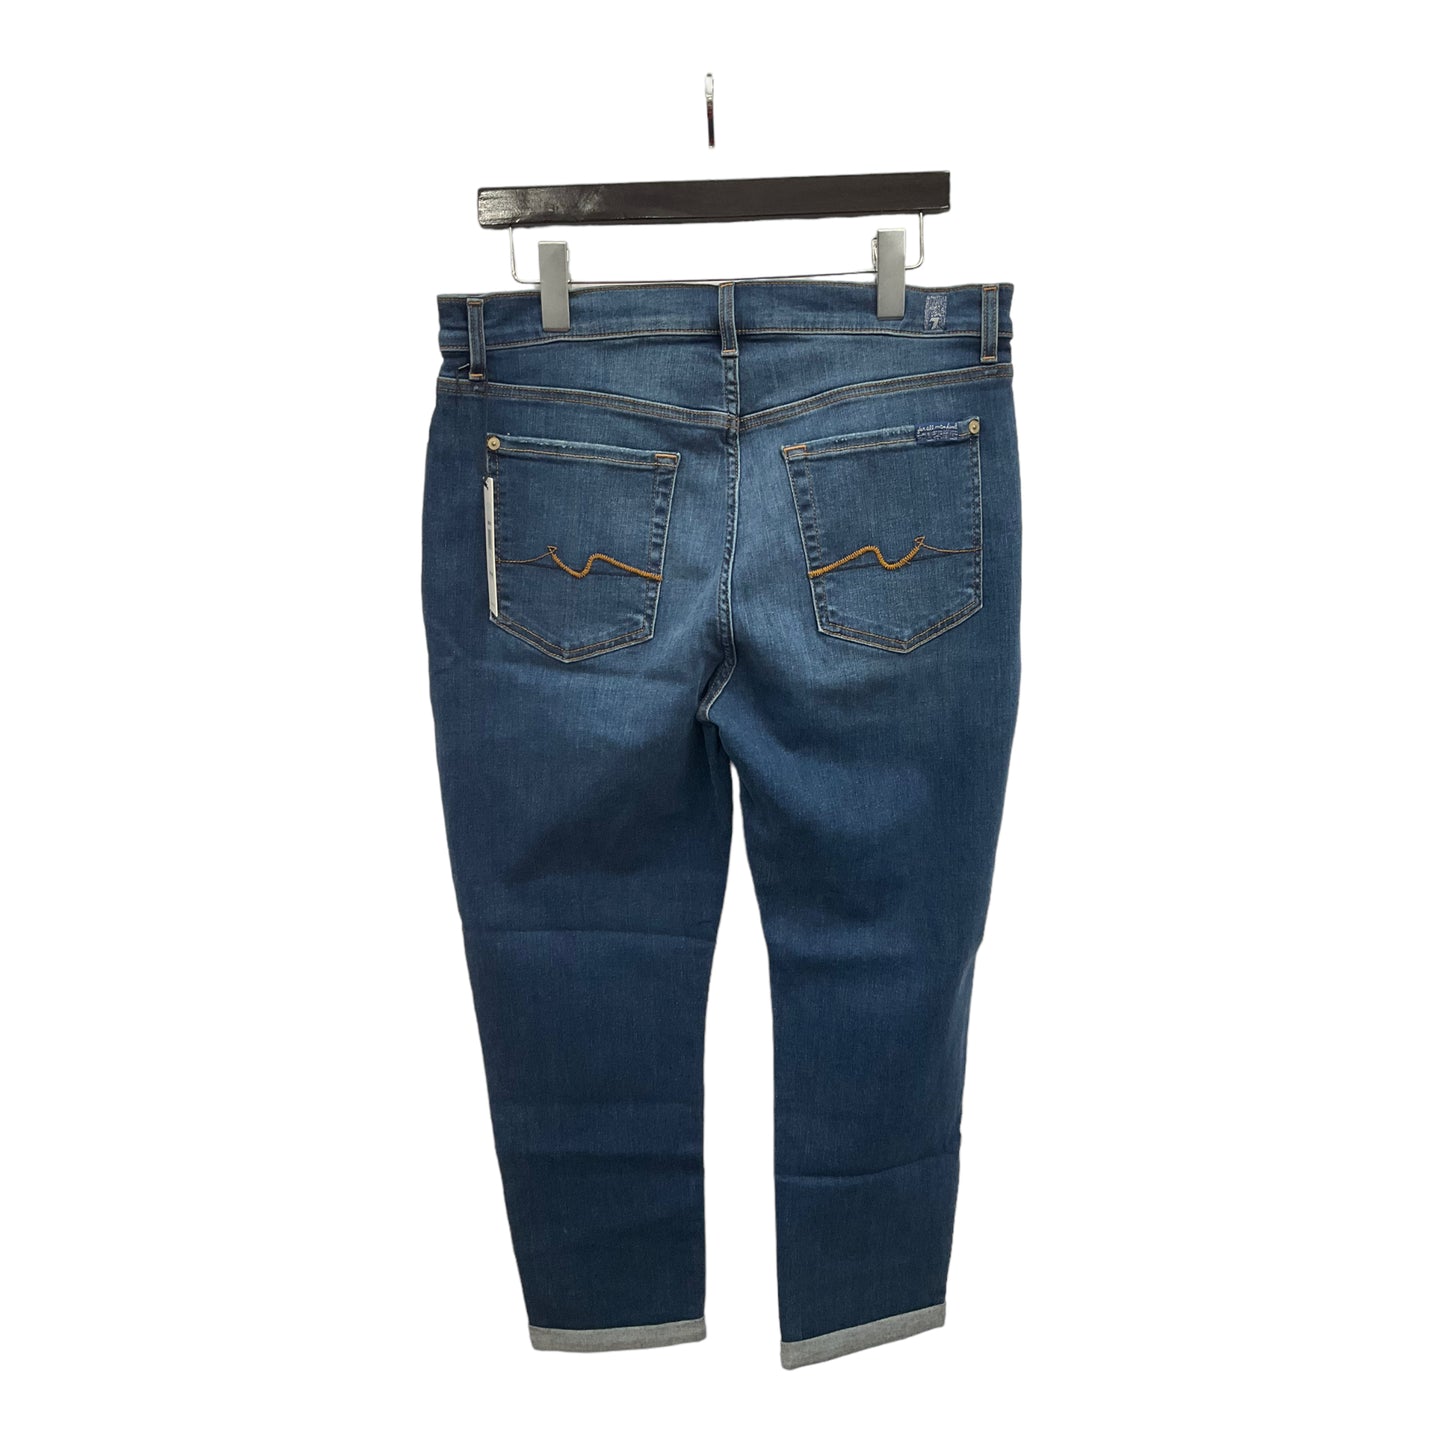 Jeans Relaxed/boyfriend By 7 For All Mankind  Size: 12